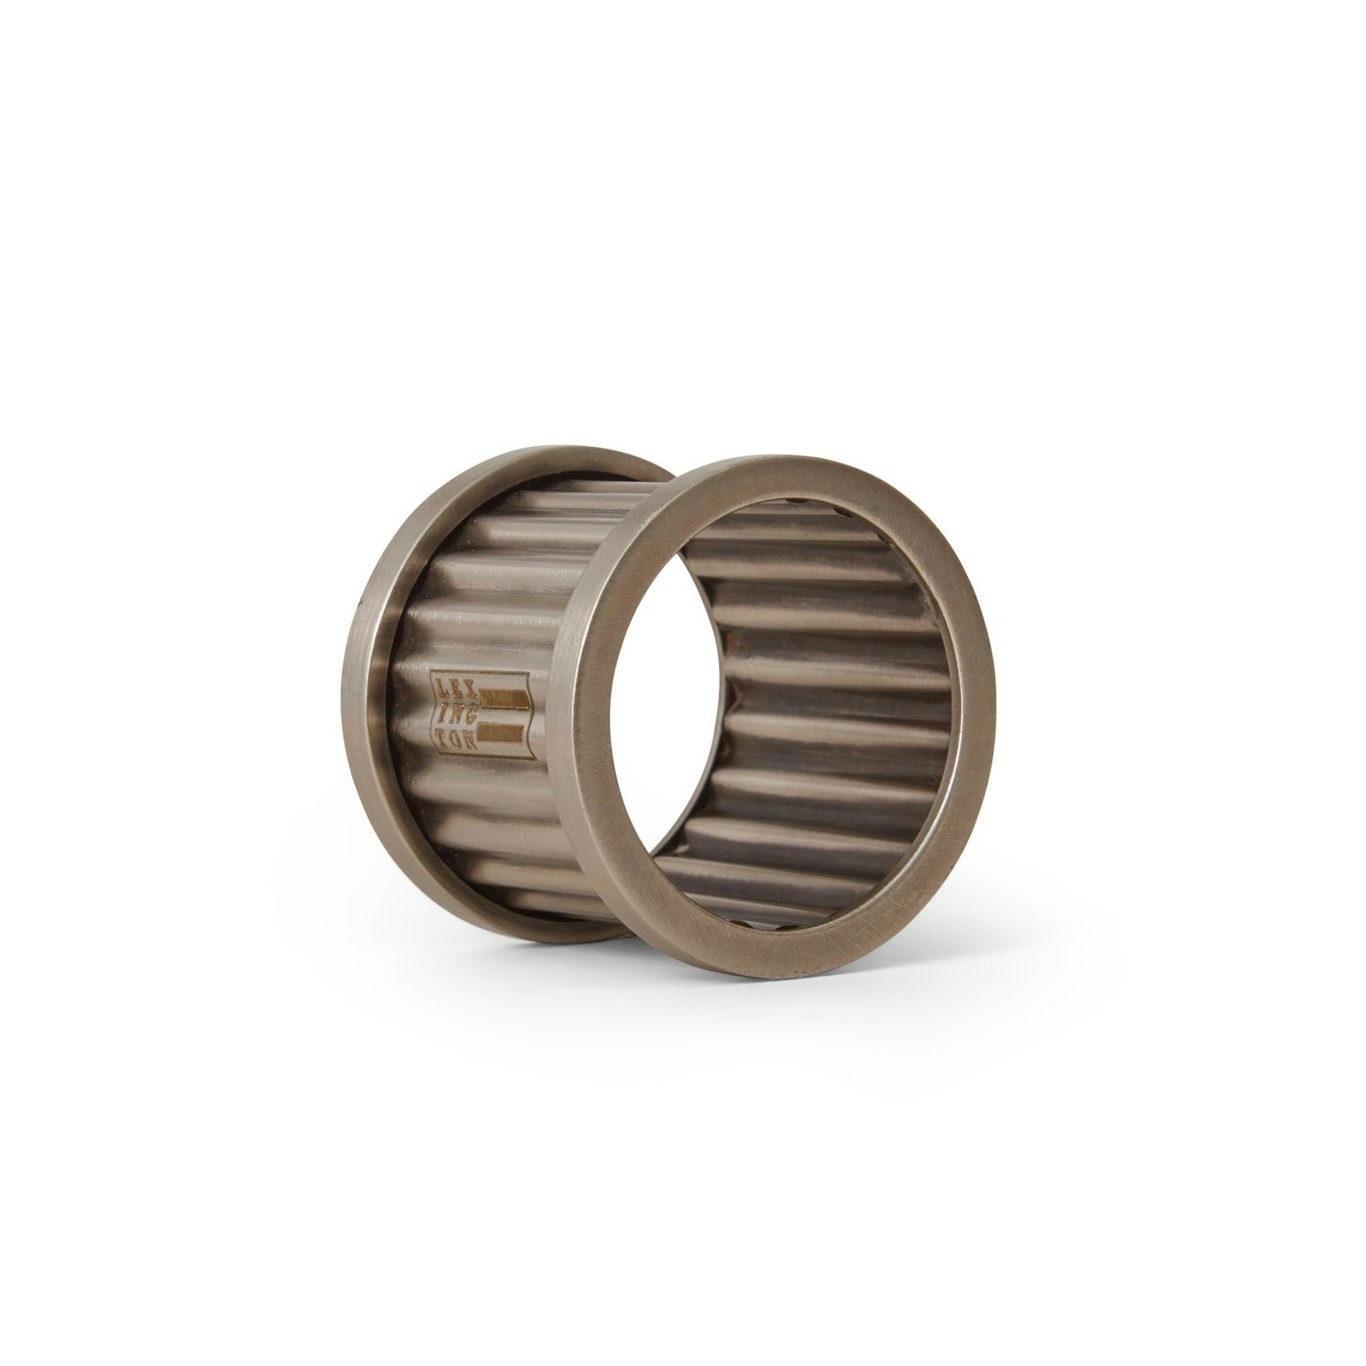 Metal Napkin Ring With Striped Structure